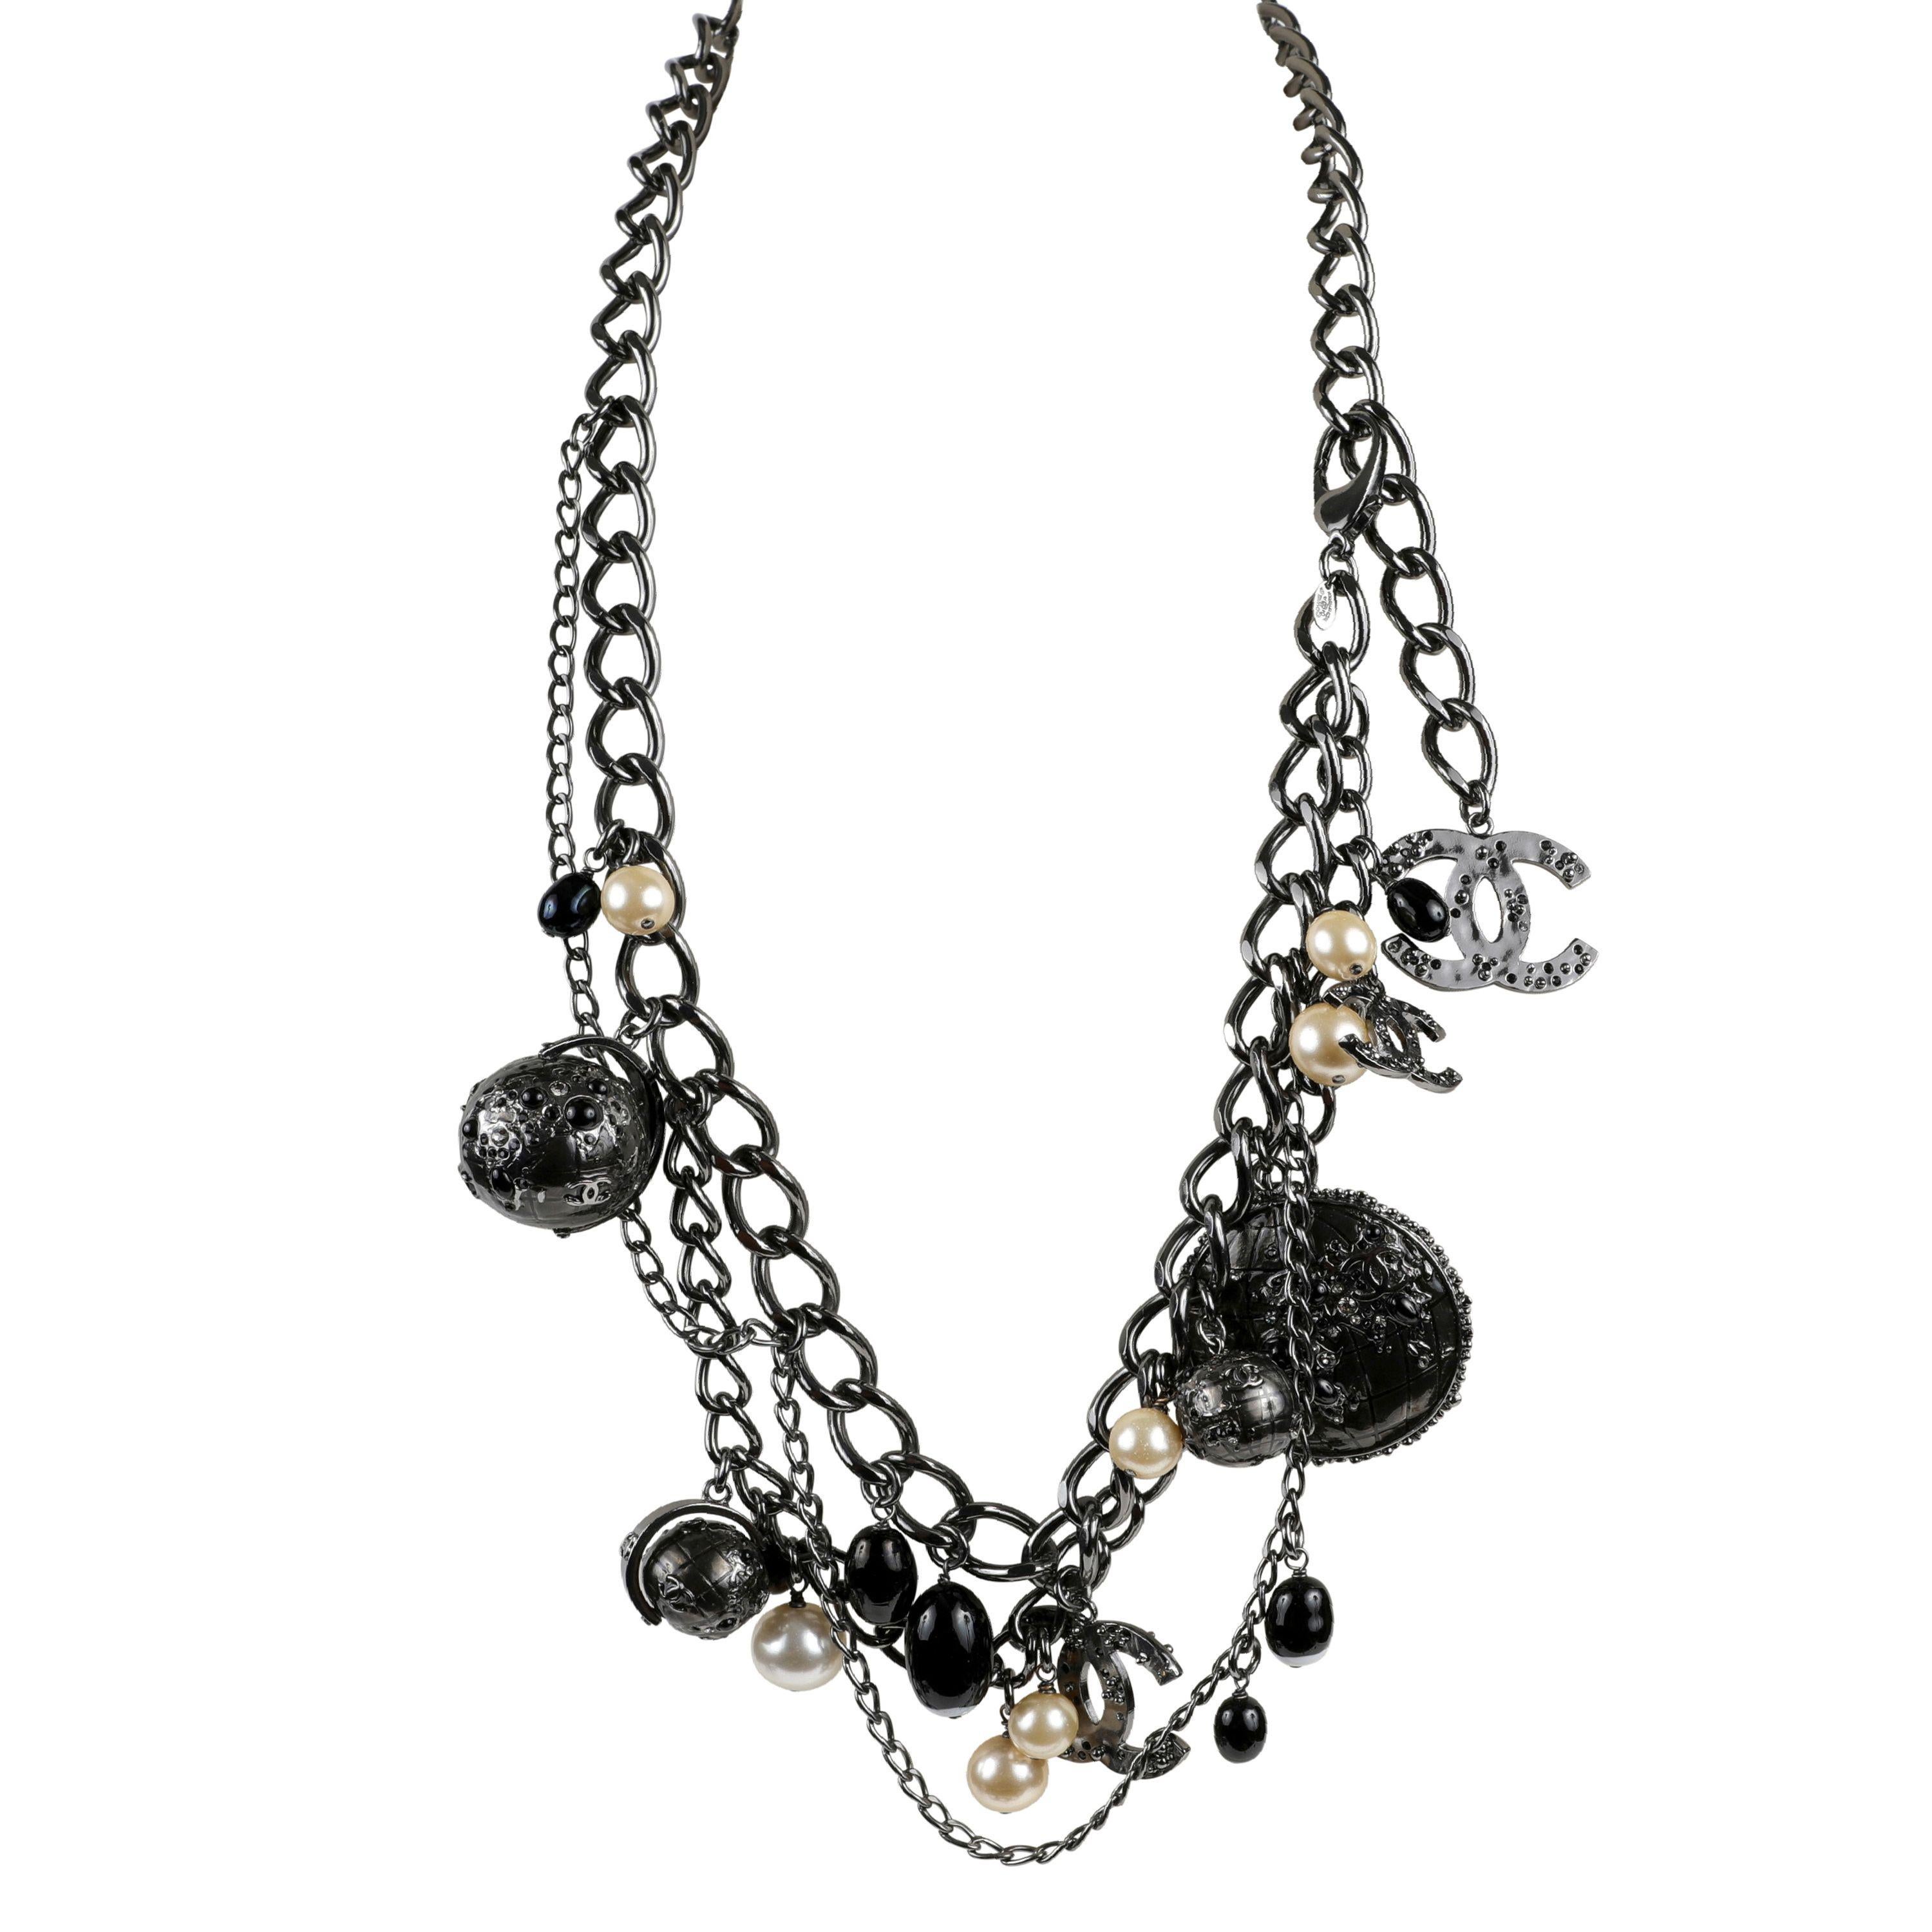 This authentic Chanel Ruthenium Globe Multi Strand Belt with Pearls is in pristine condition.  Ruthenium chains with dangling faux pearls, CC charms, black beads and flower applique globe charms.    May be worn as a belt or a necklace.  Pouch or box